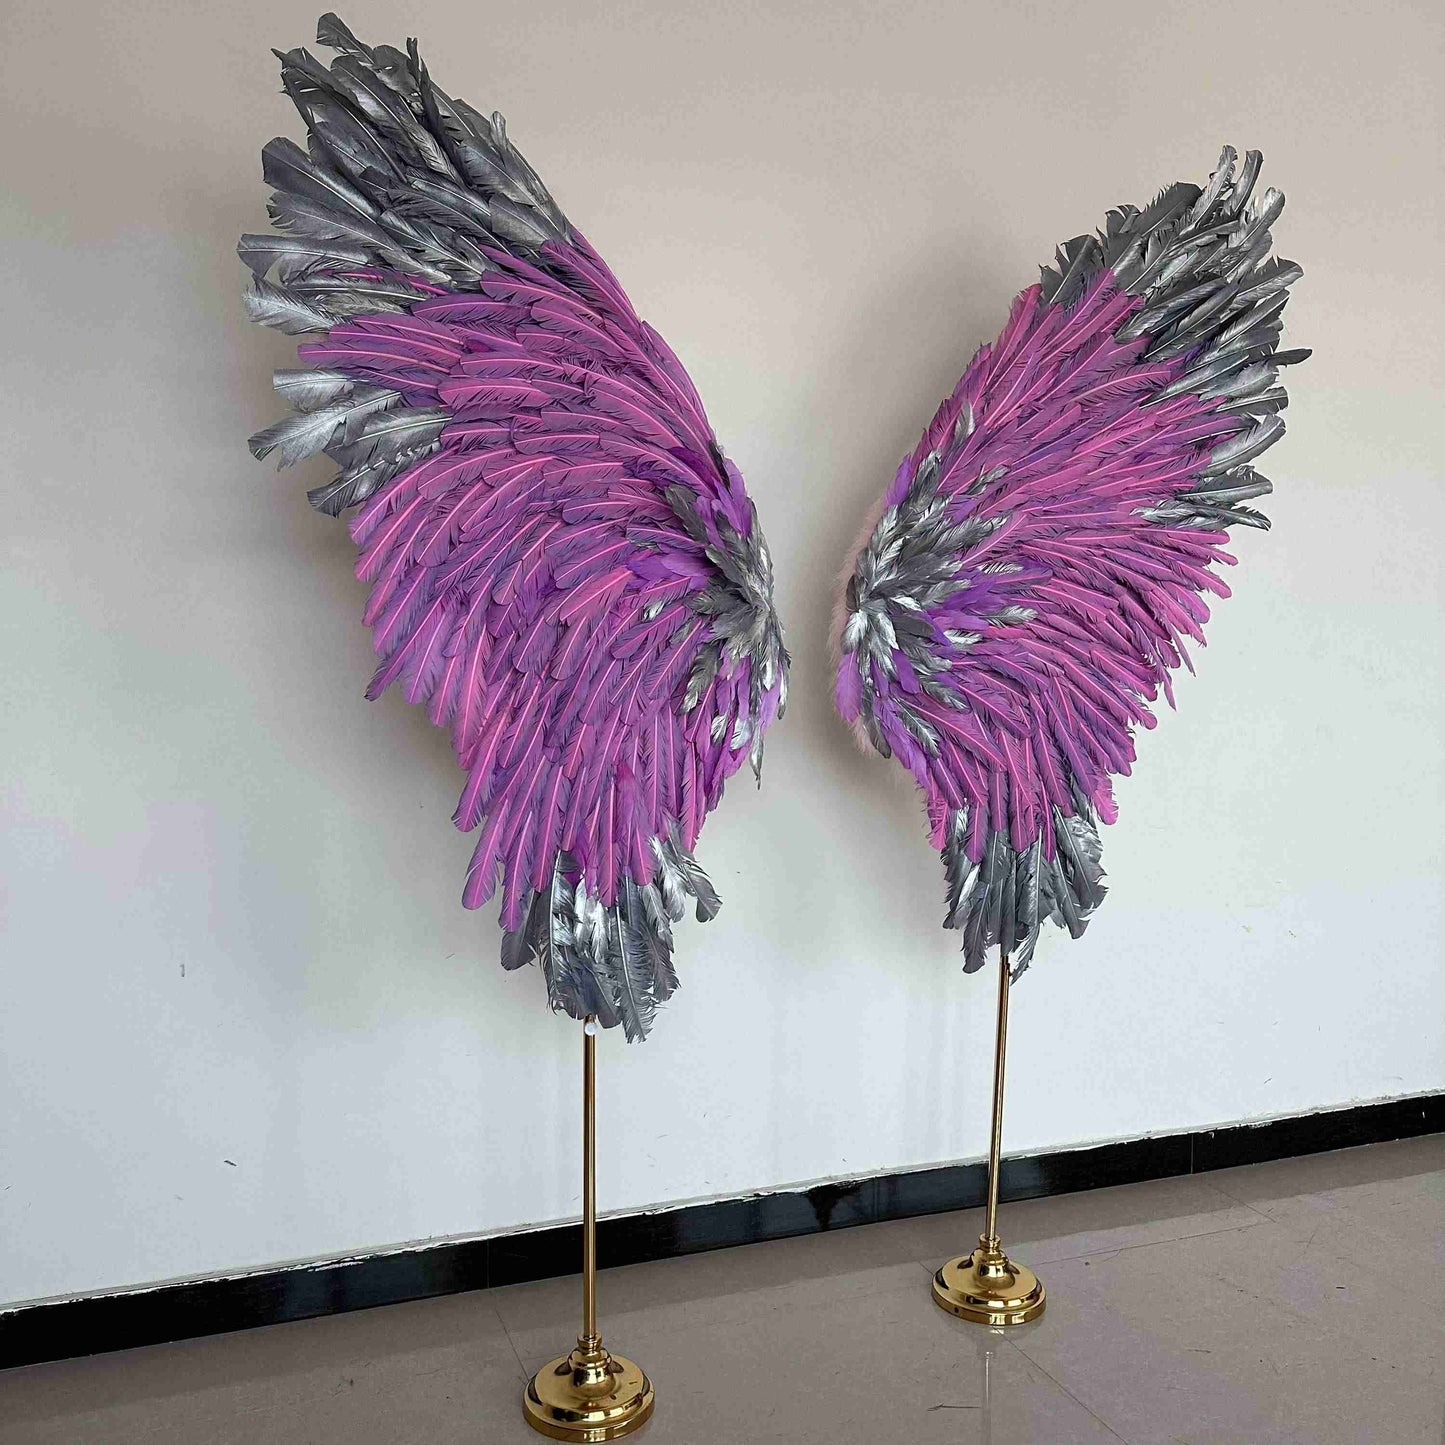 Our silver pink angel wings on poles from the right side. Made from goose feathers. Wings for decoration. Suitable for restaurant, cafe, night club, event decorations.